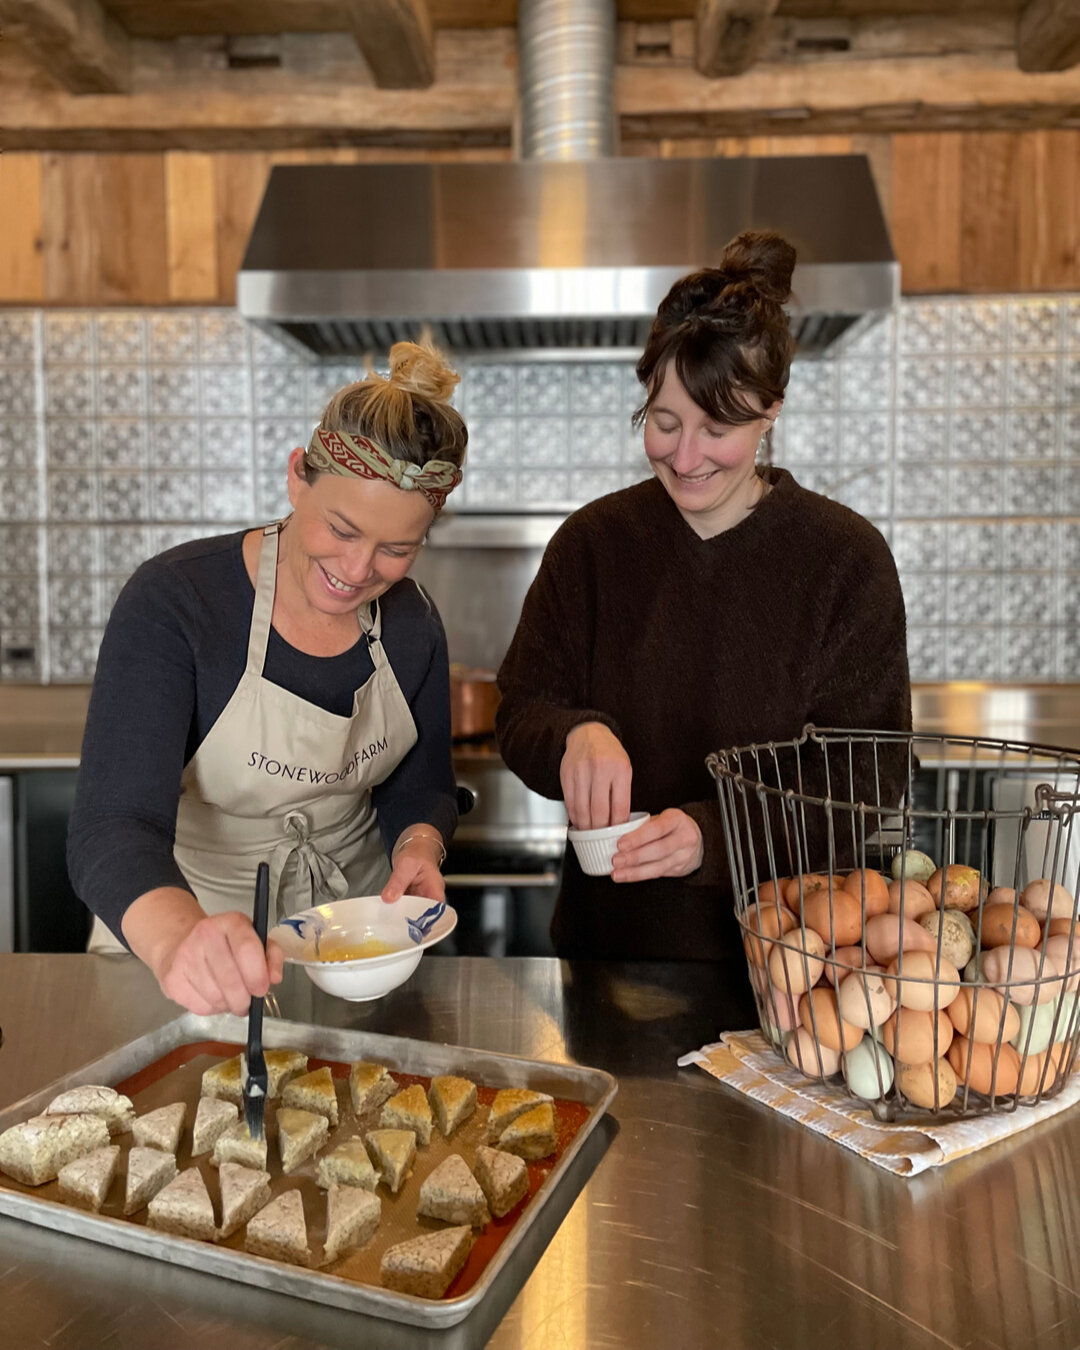 March is Women&rsquo;s History Month. It&rsquo;s the perfect time to celebrate all the professionals who have contributed so much to the success of Stonewood Farm over the last nine years. Thank you to Culinary Director Kristen Essig and Farm Manager